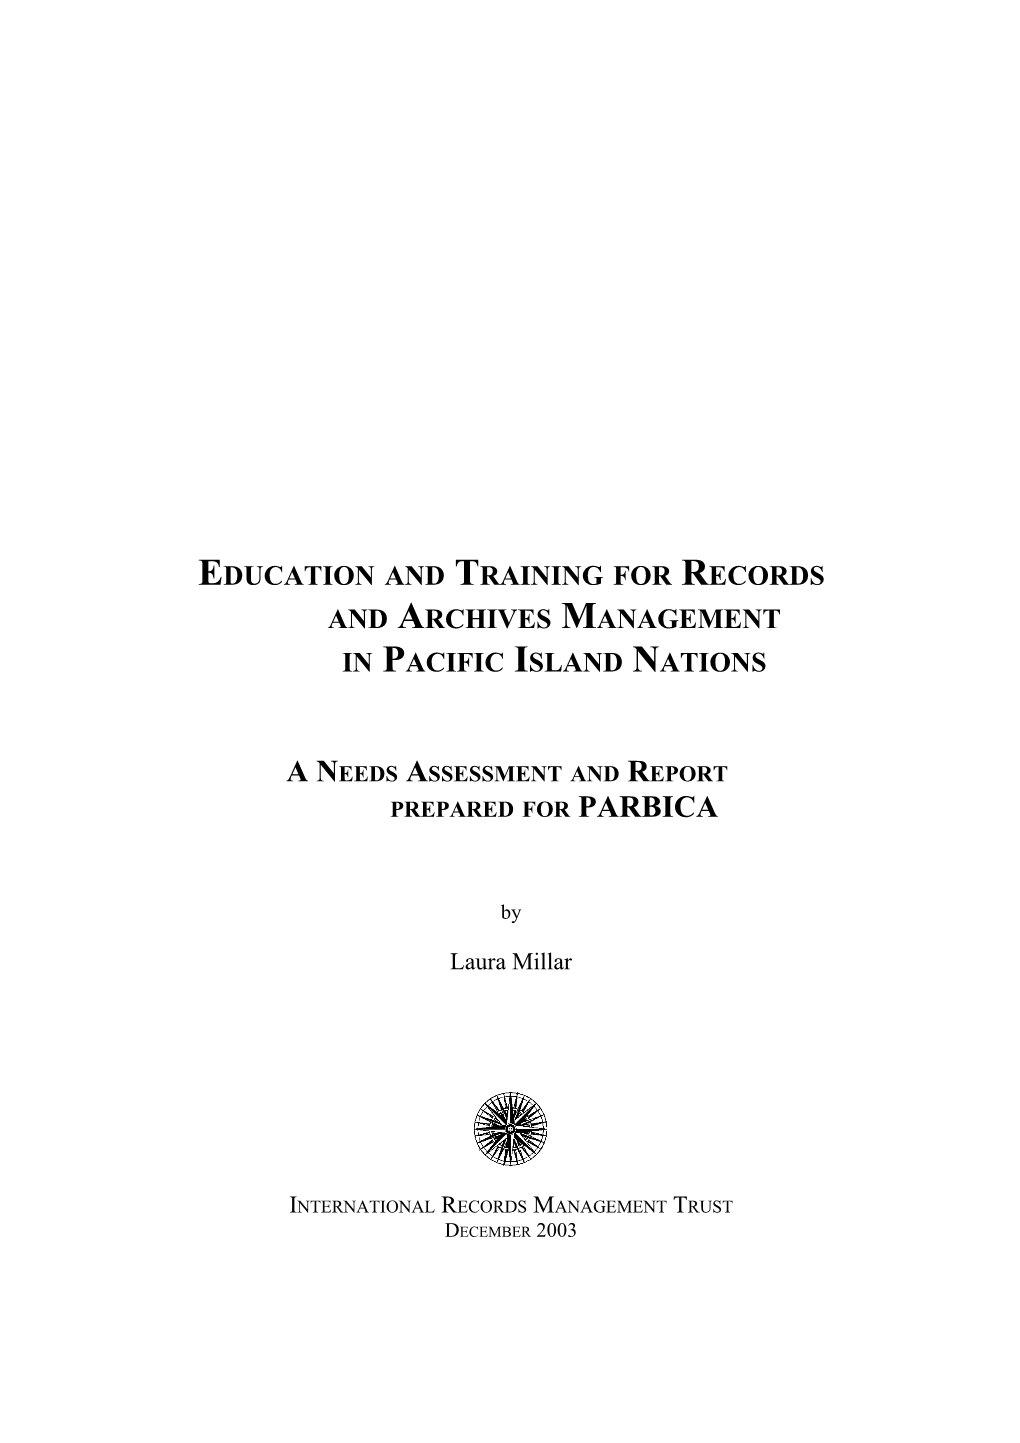 Education and Training for Recordsand Archives Managementin Pacificisland Nations